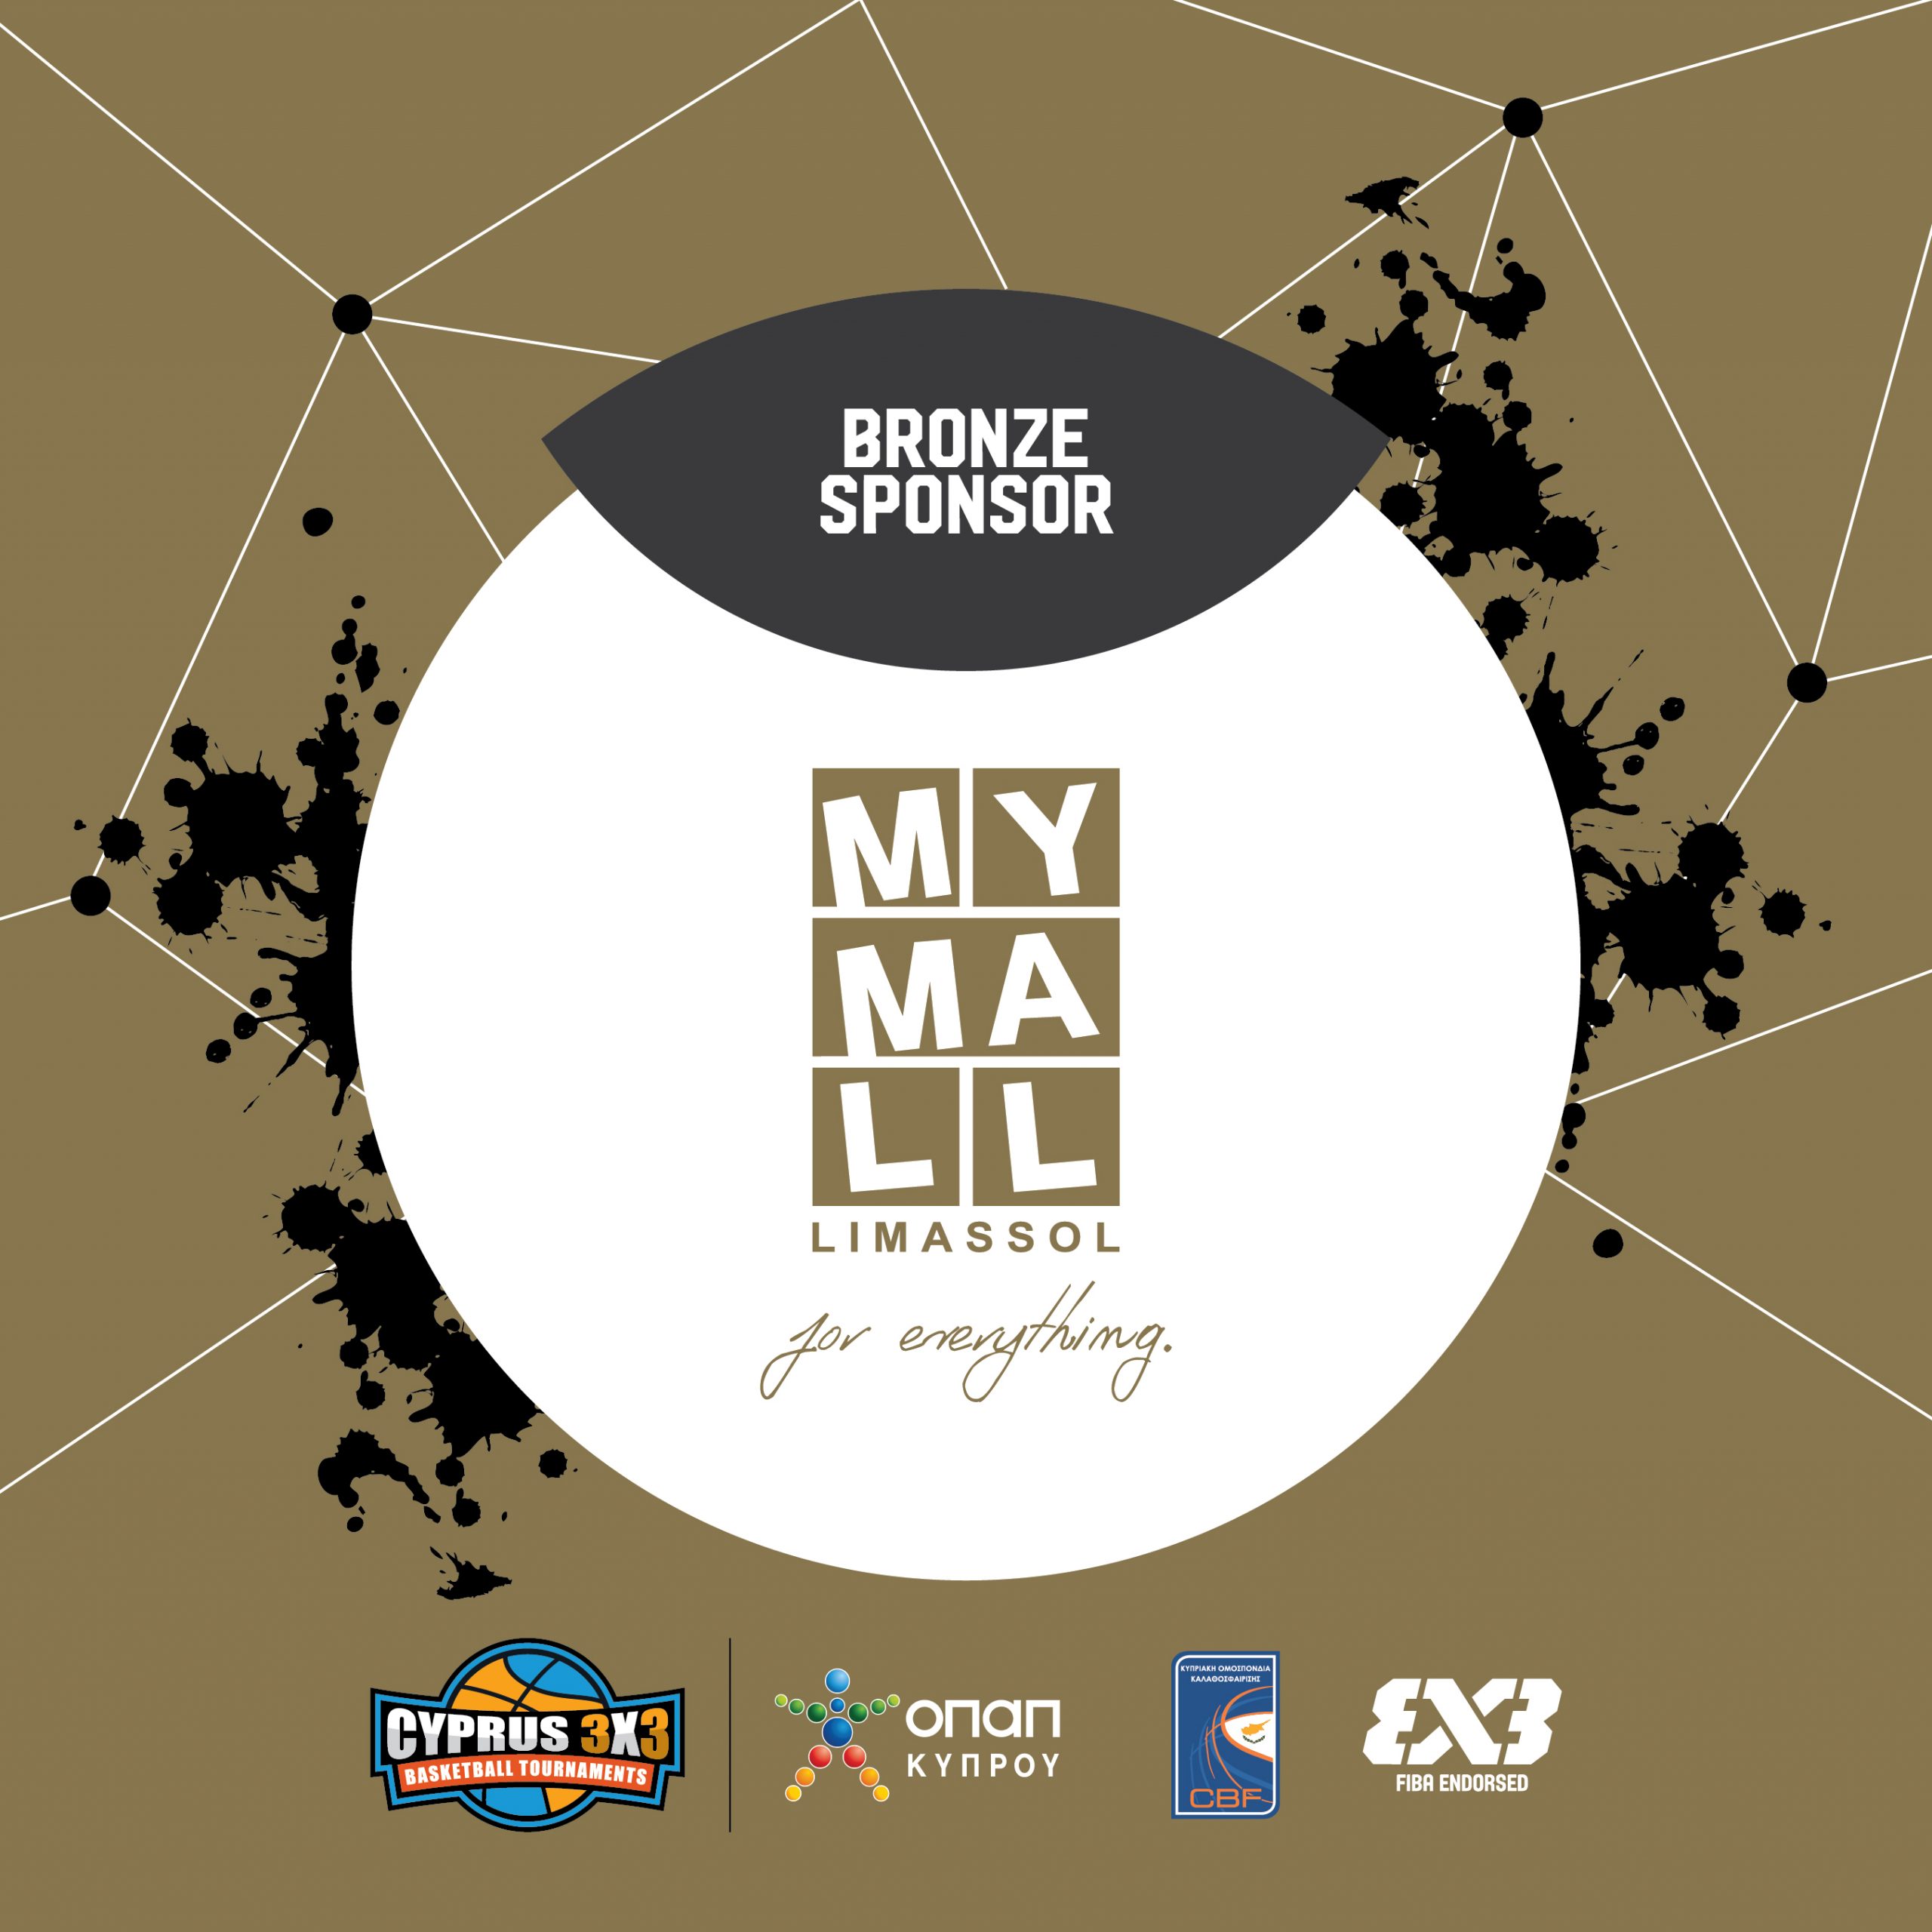 Read more about the article Limassol’s MYMALL Supports Cyprus 3×3 as Bronze Sponsor